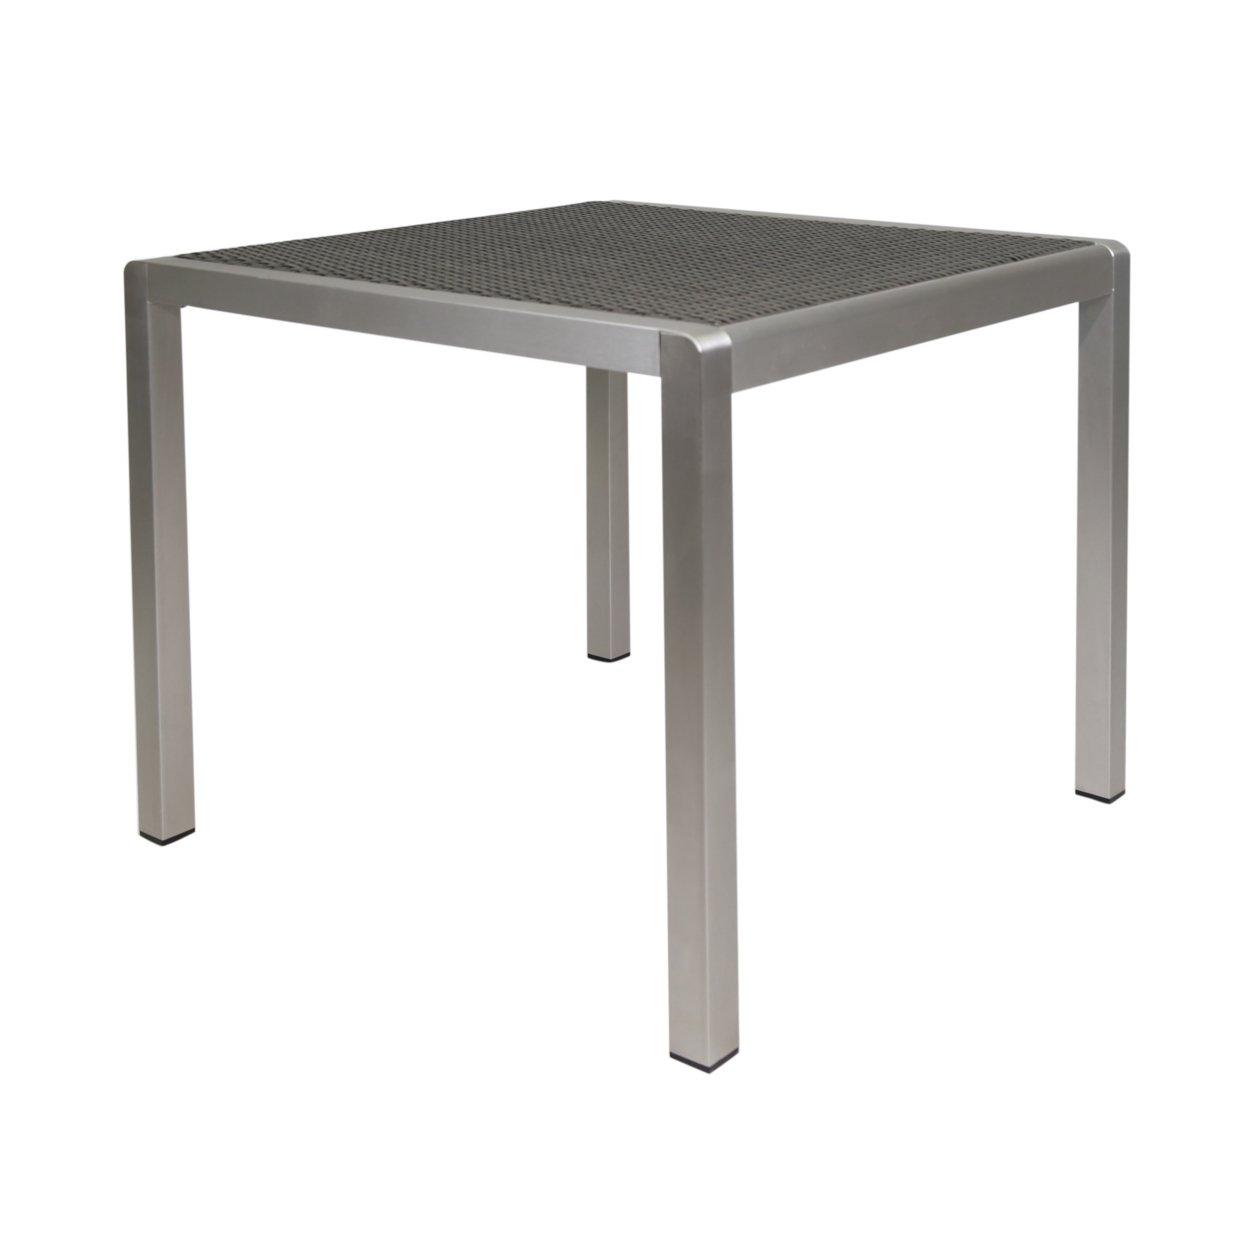 Louie Coral Outdoor Dining Table - Anodized Aluminum - Wicker Table Top - Square - Silver And Gray - 35-inch